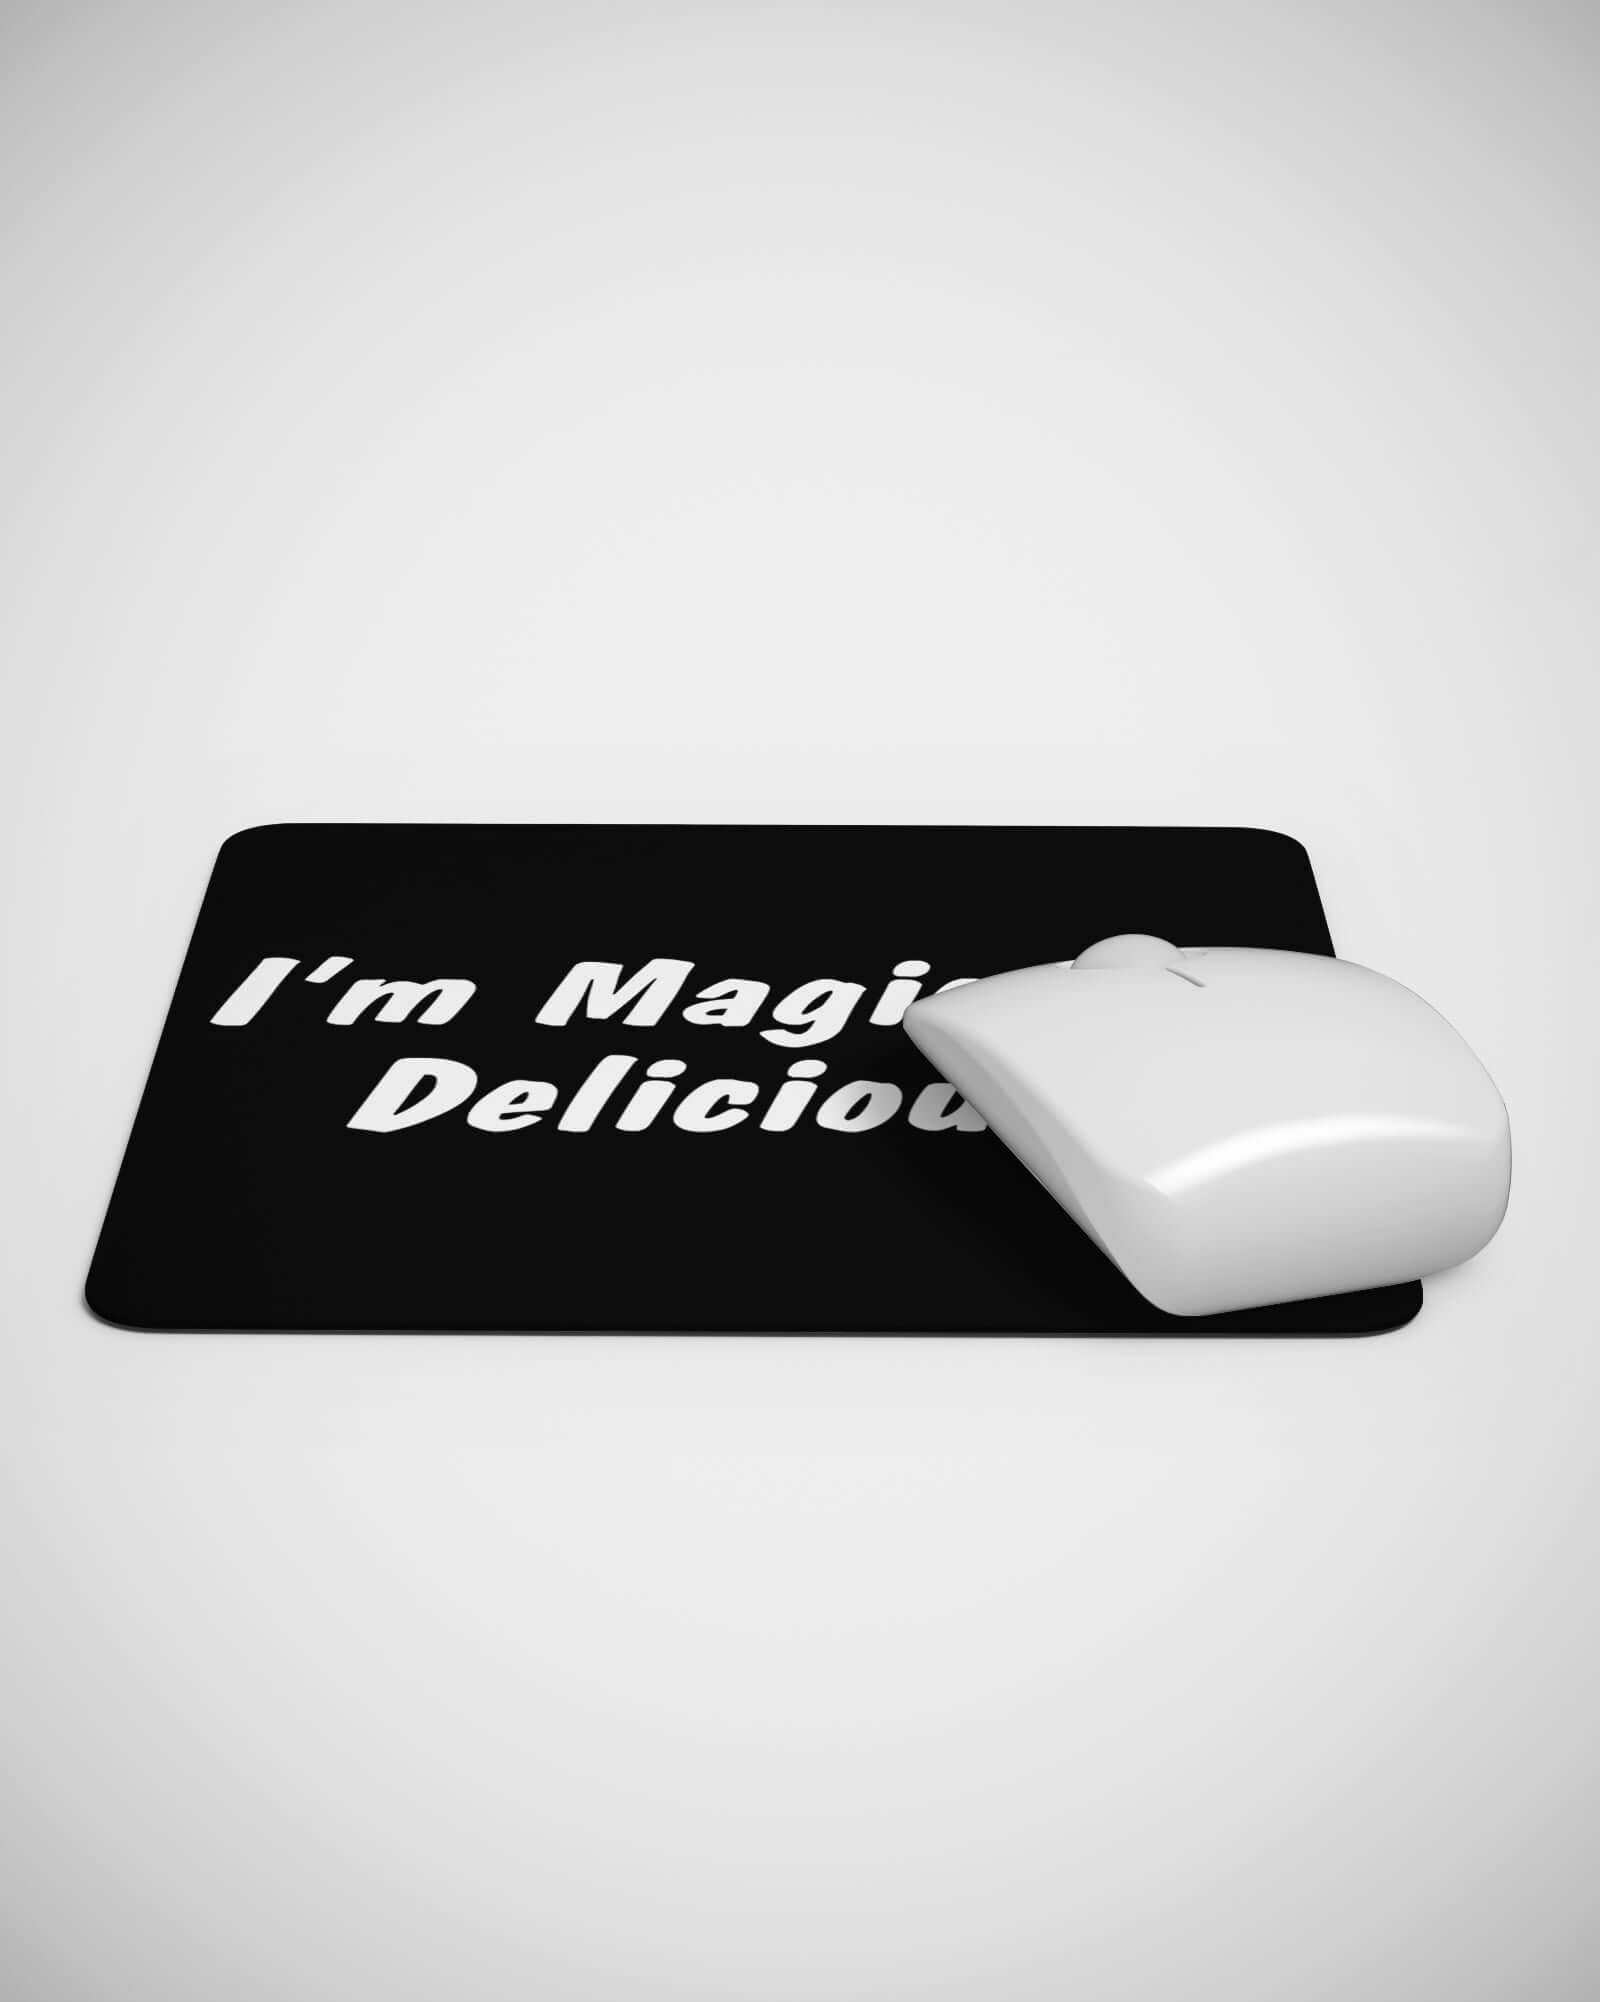 Magically Delicious Sarcastic Cool Funny Mouse pad